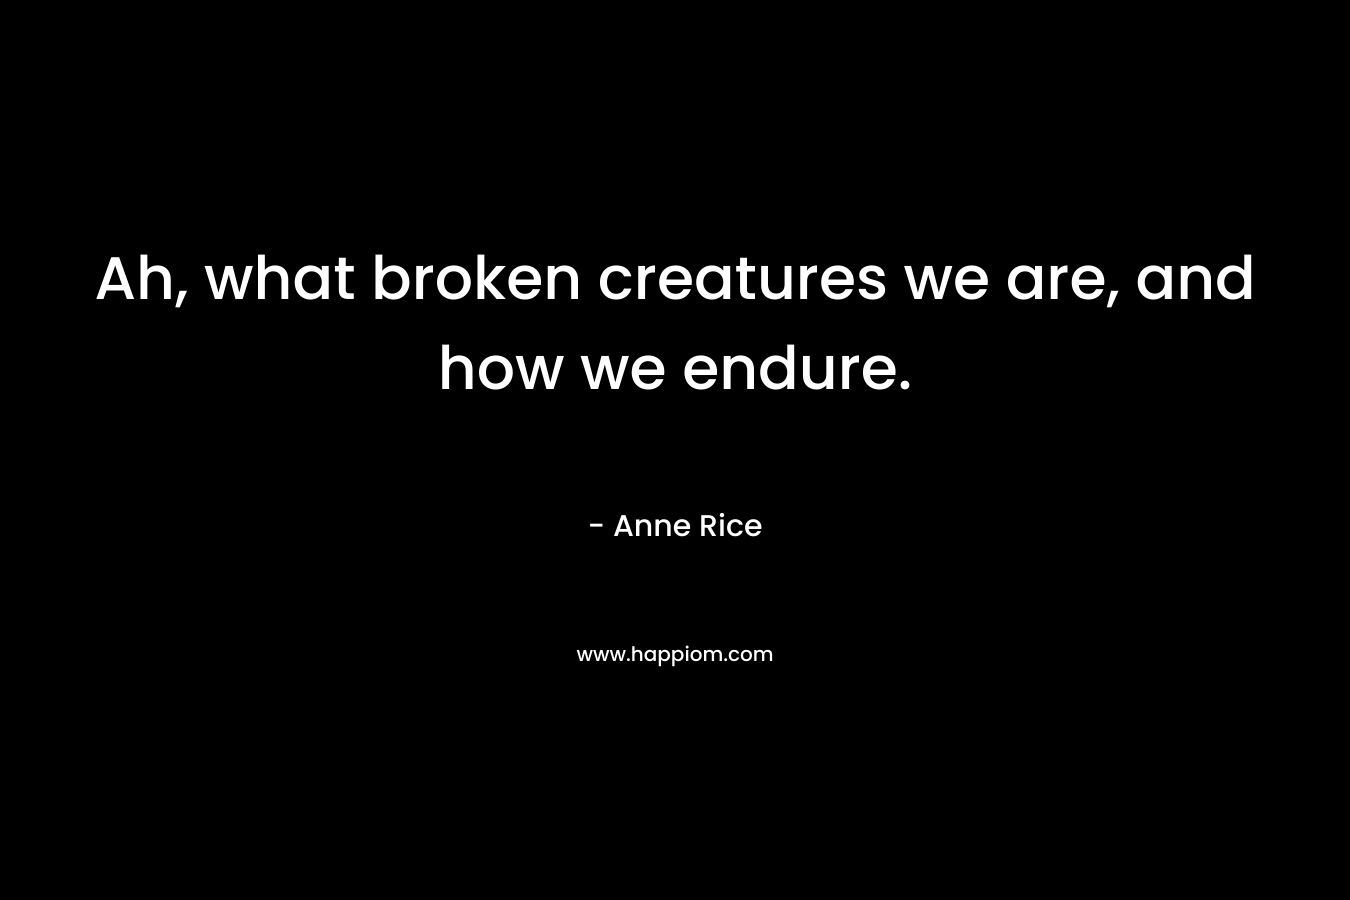 Ah, what broken creatures we are, and how we endure. – Anne Rice